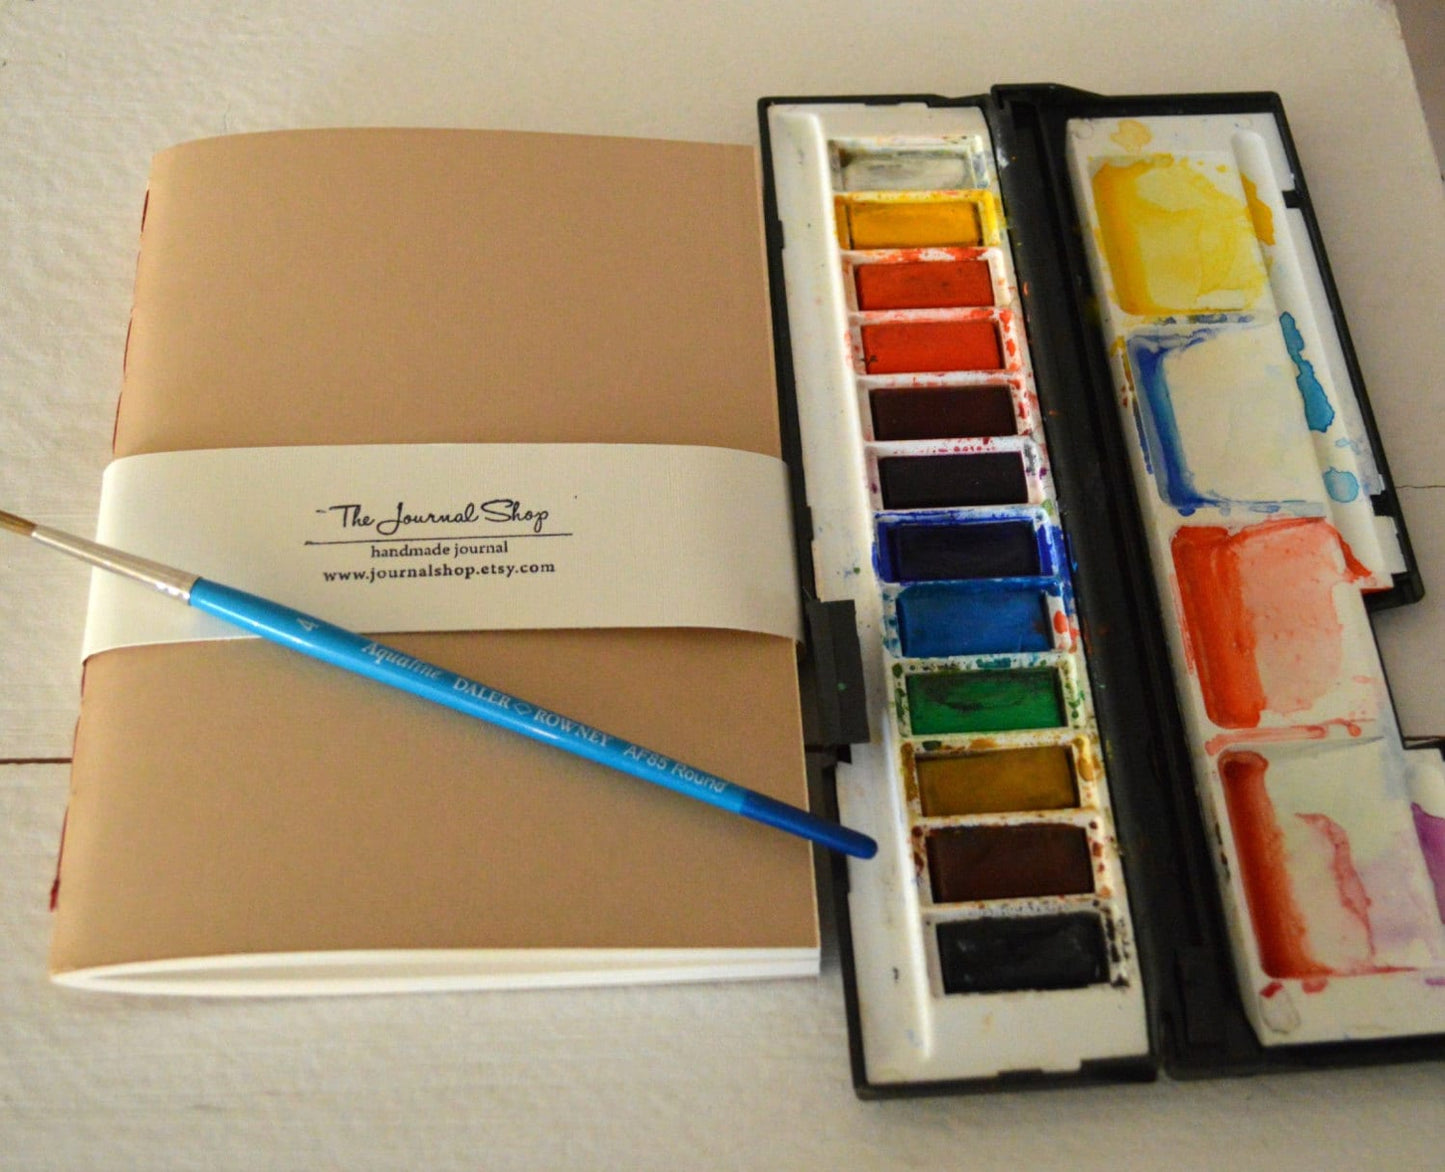 140lbs Watercolor Softcover Sketchbook / Insert - A5, 40 Pages